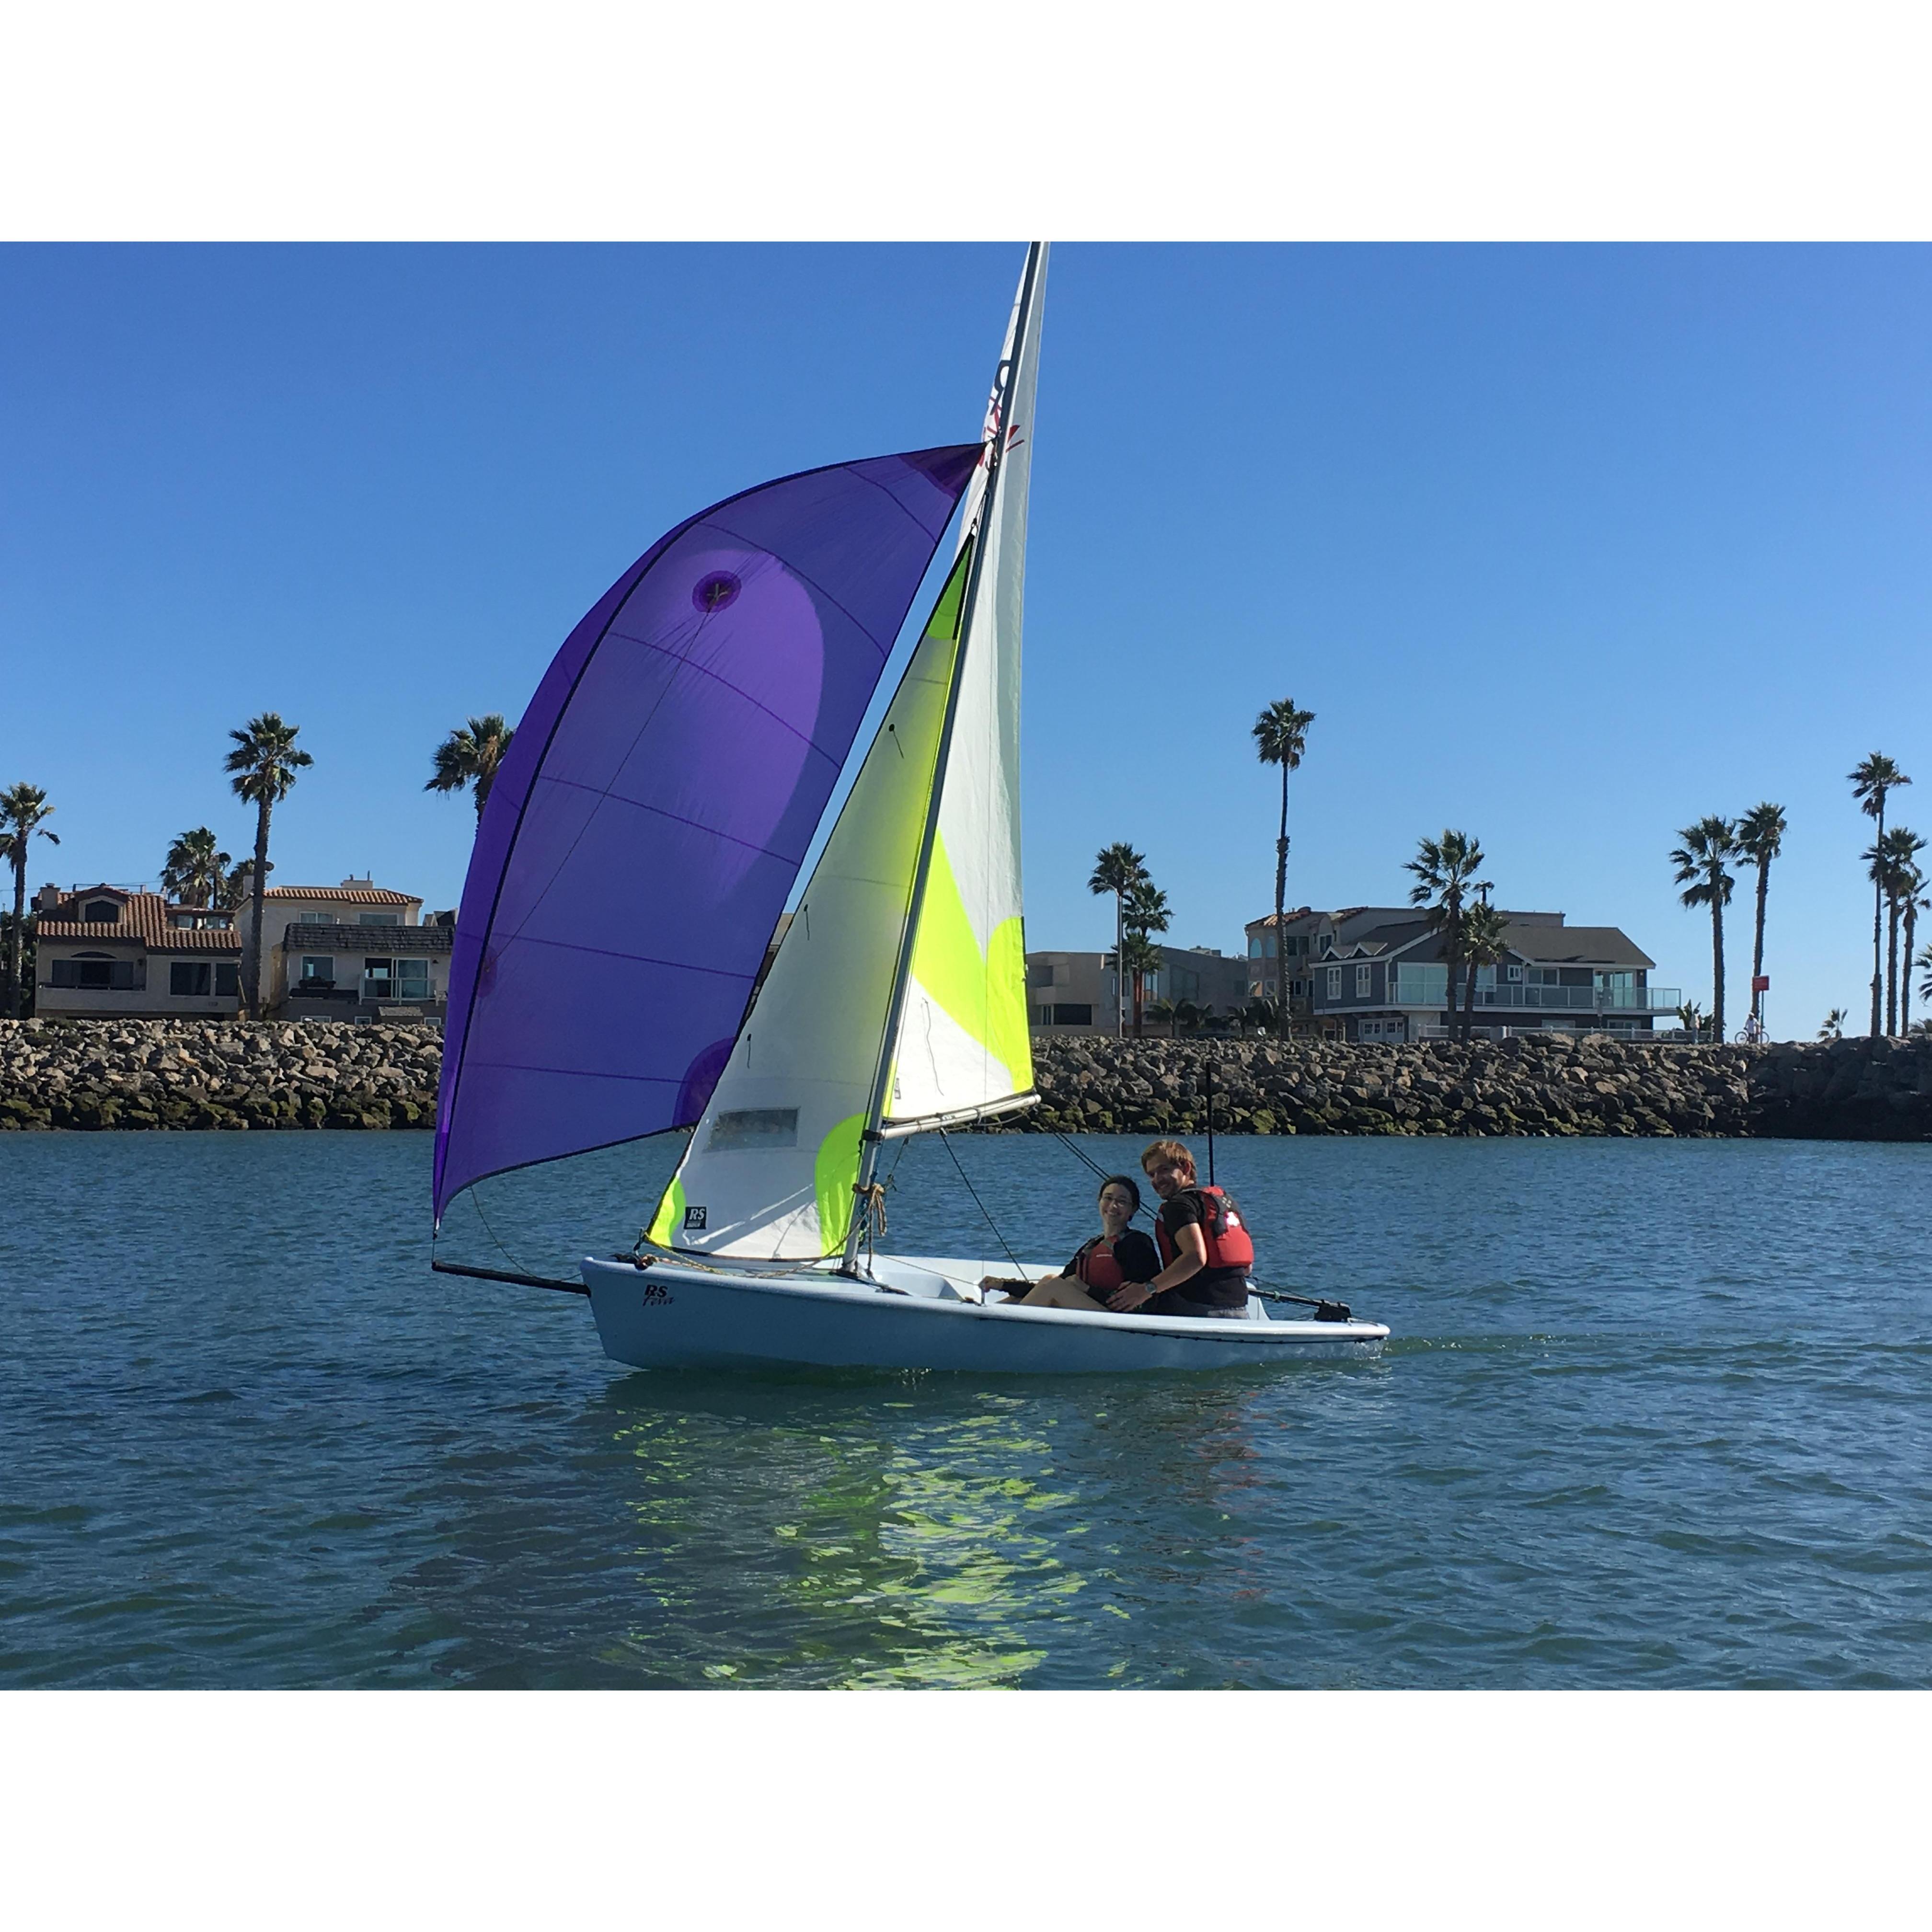 Sailing lessons at the CI Boating Center in Channel Islands Harbor.